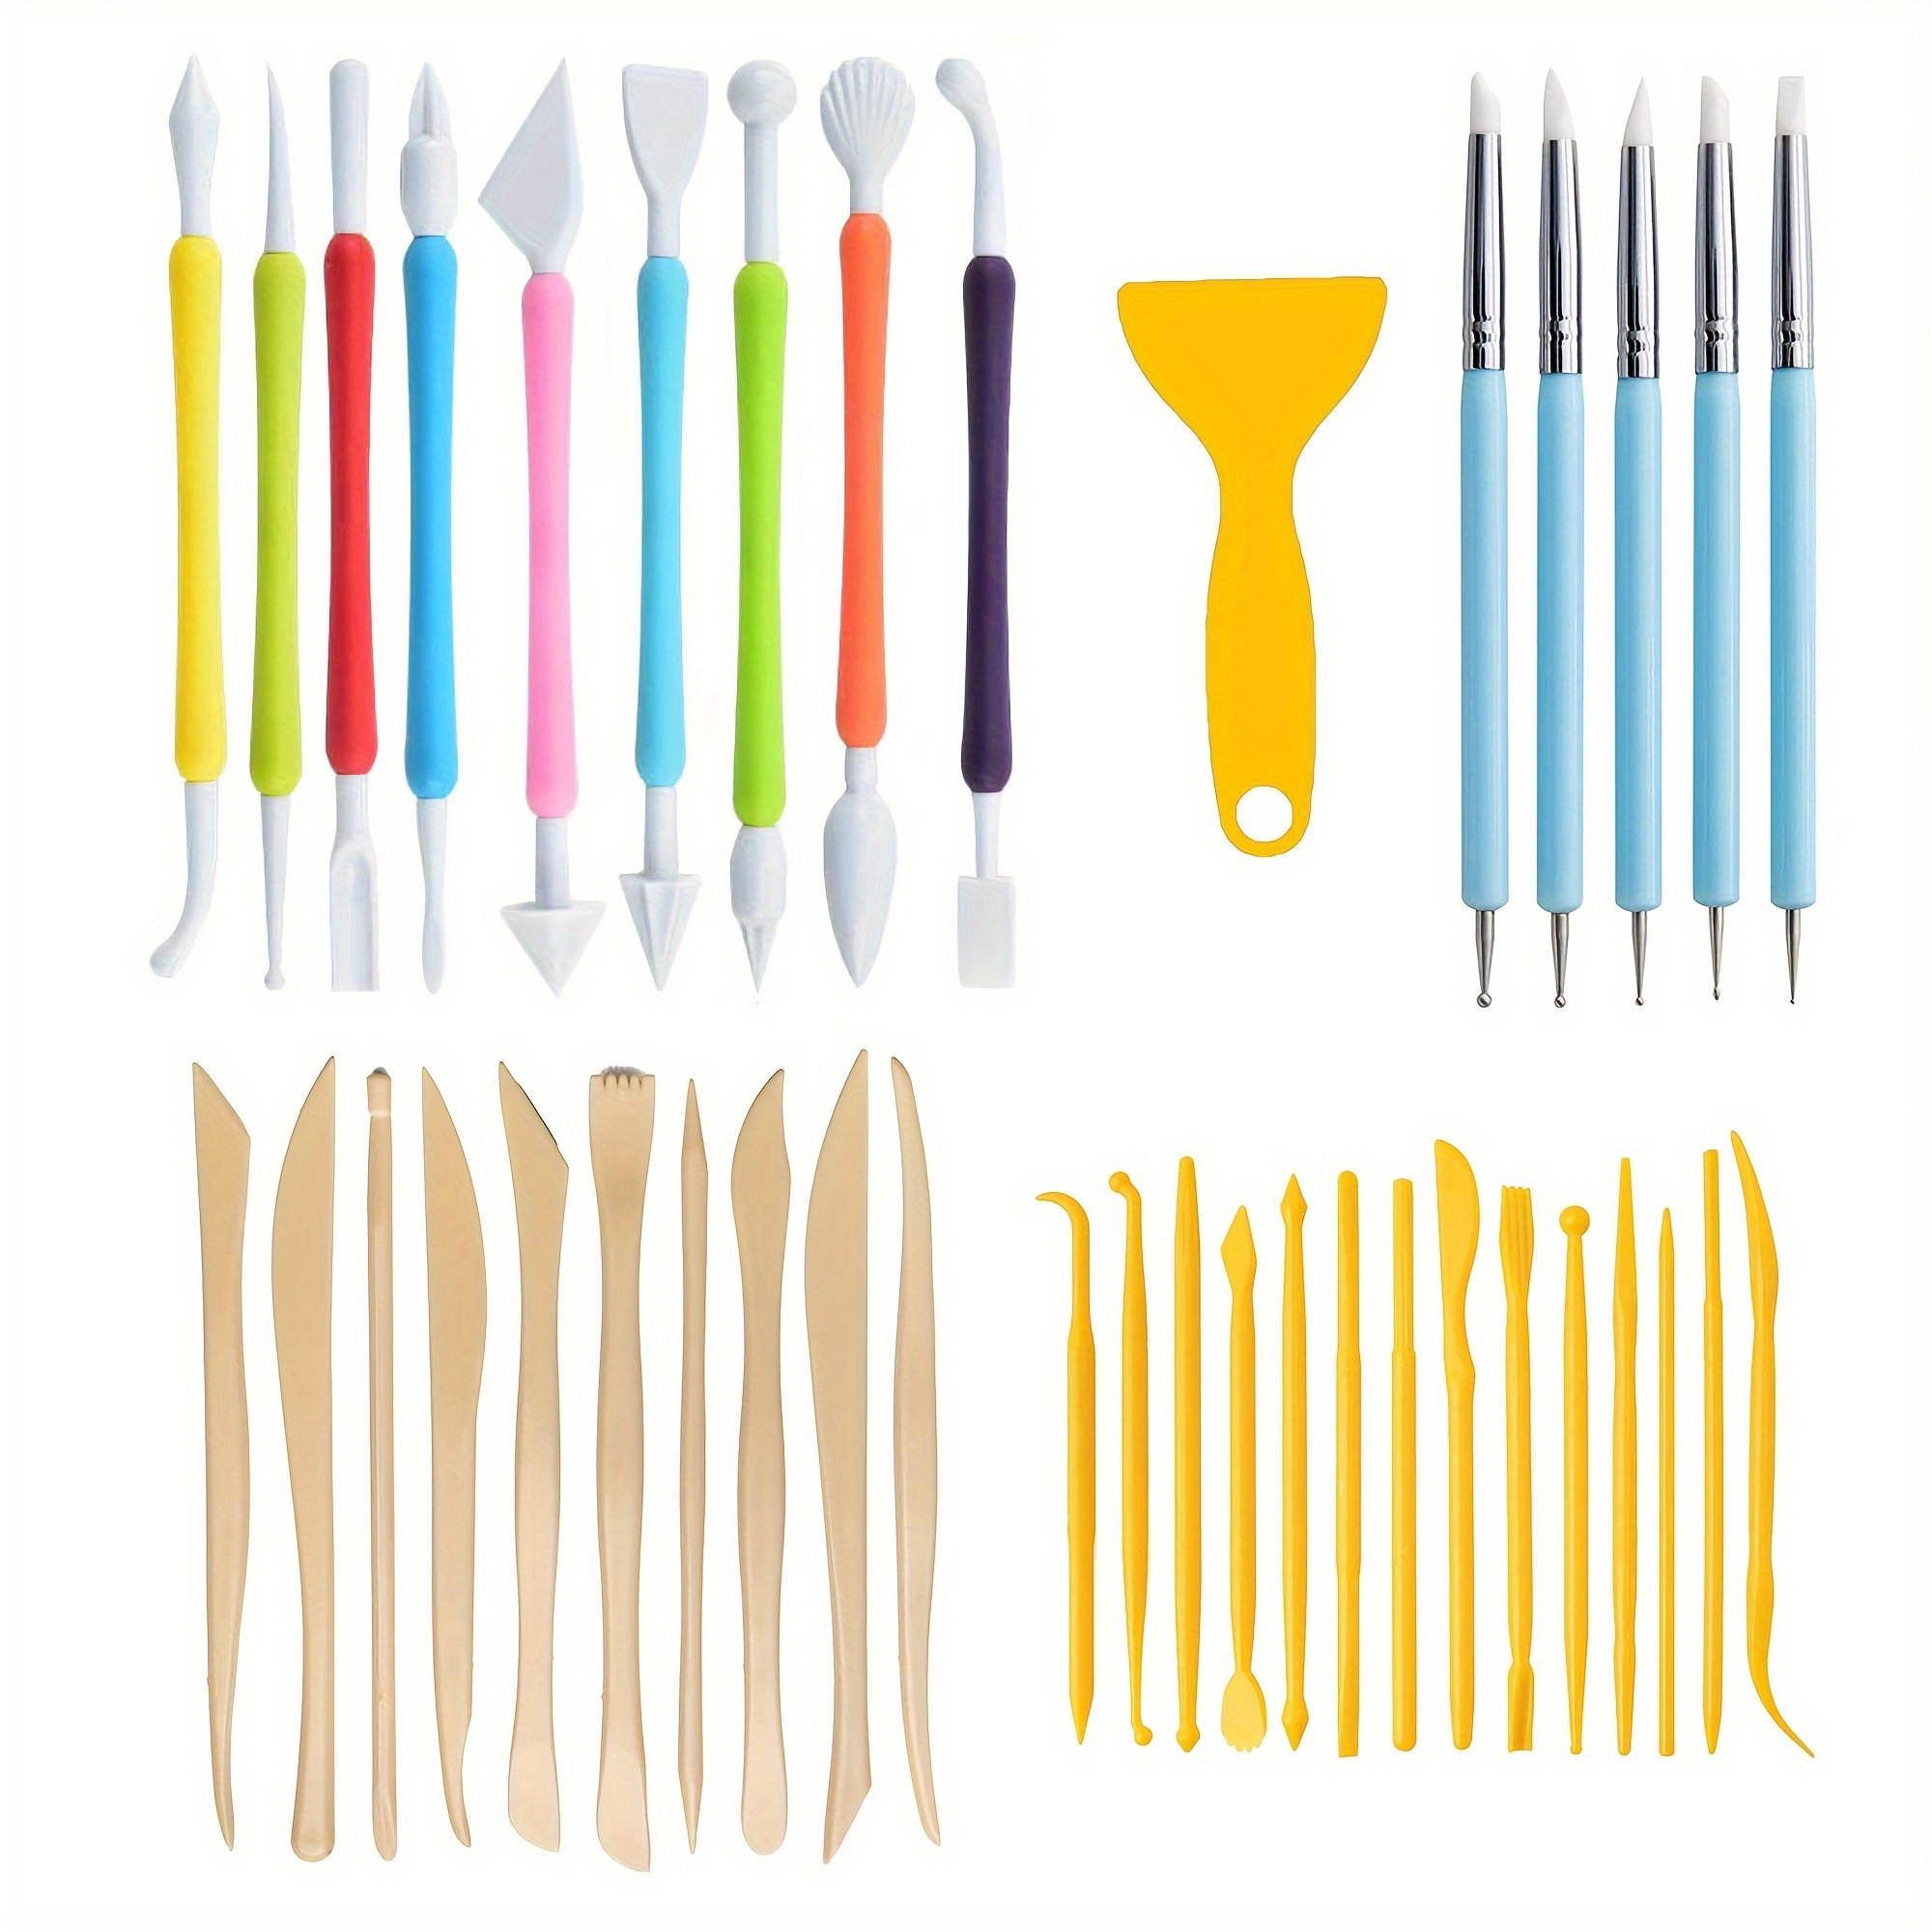 Jetmore 12 Pack Clay Tools Kit, Pottery Tools & Sculpting Tools, Polymer  Modeling Clay Cutters Sculpture Set for Carving, Ceramics, Molding, DIY